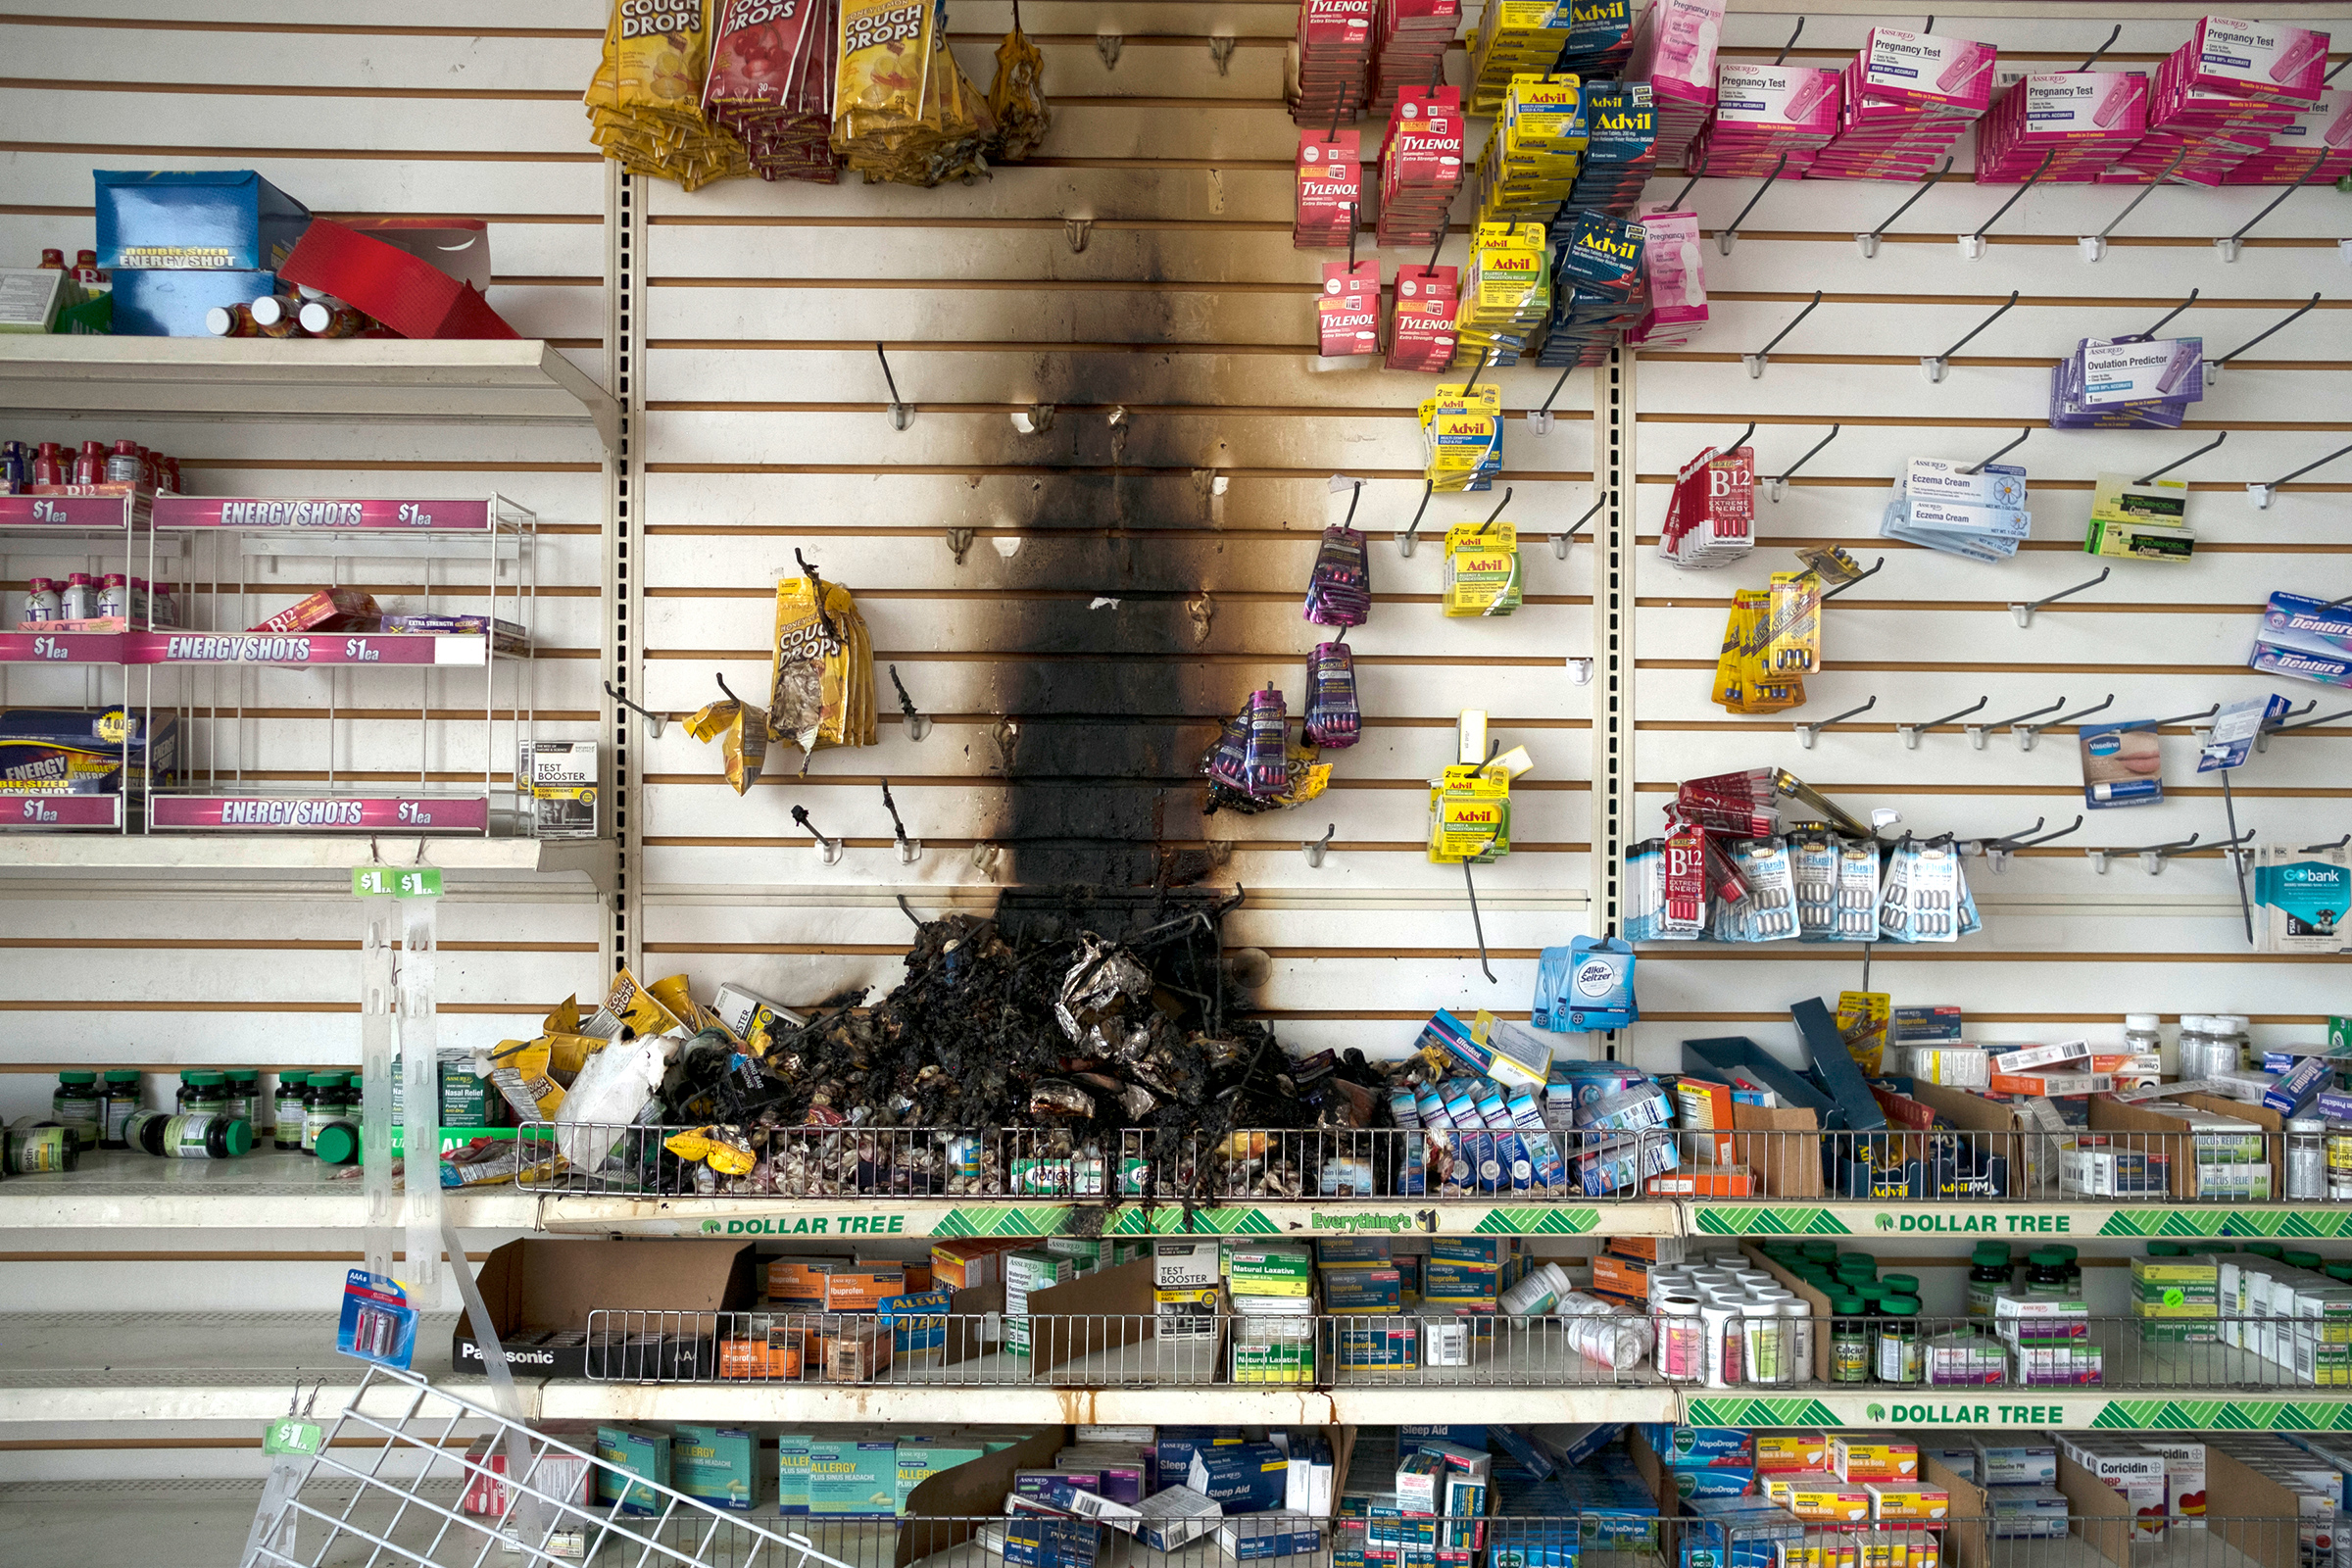 Fire damage is seen inside a Dollar Tree in Minneapolis on May 28, following nights of protests and vandalism in response to the police killing of George Floyd three days earlier. (Brooklynn Kascel—Polaris)